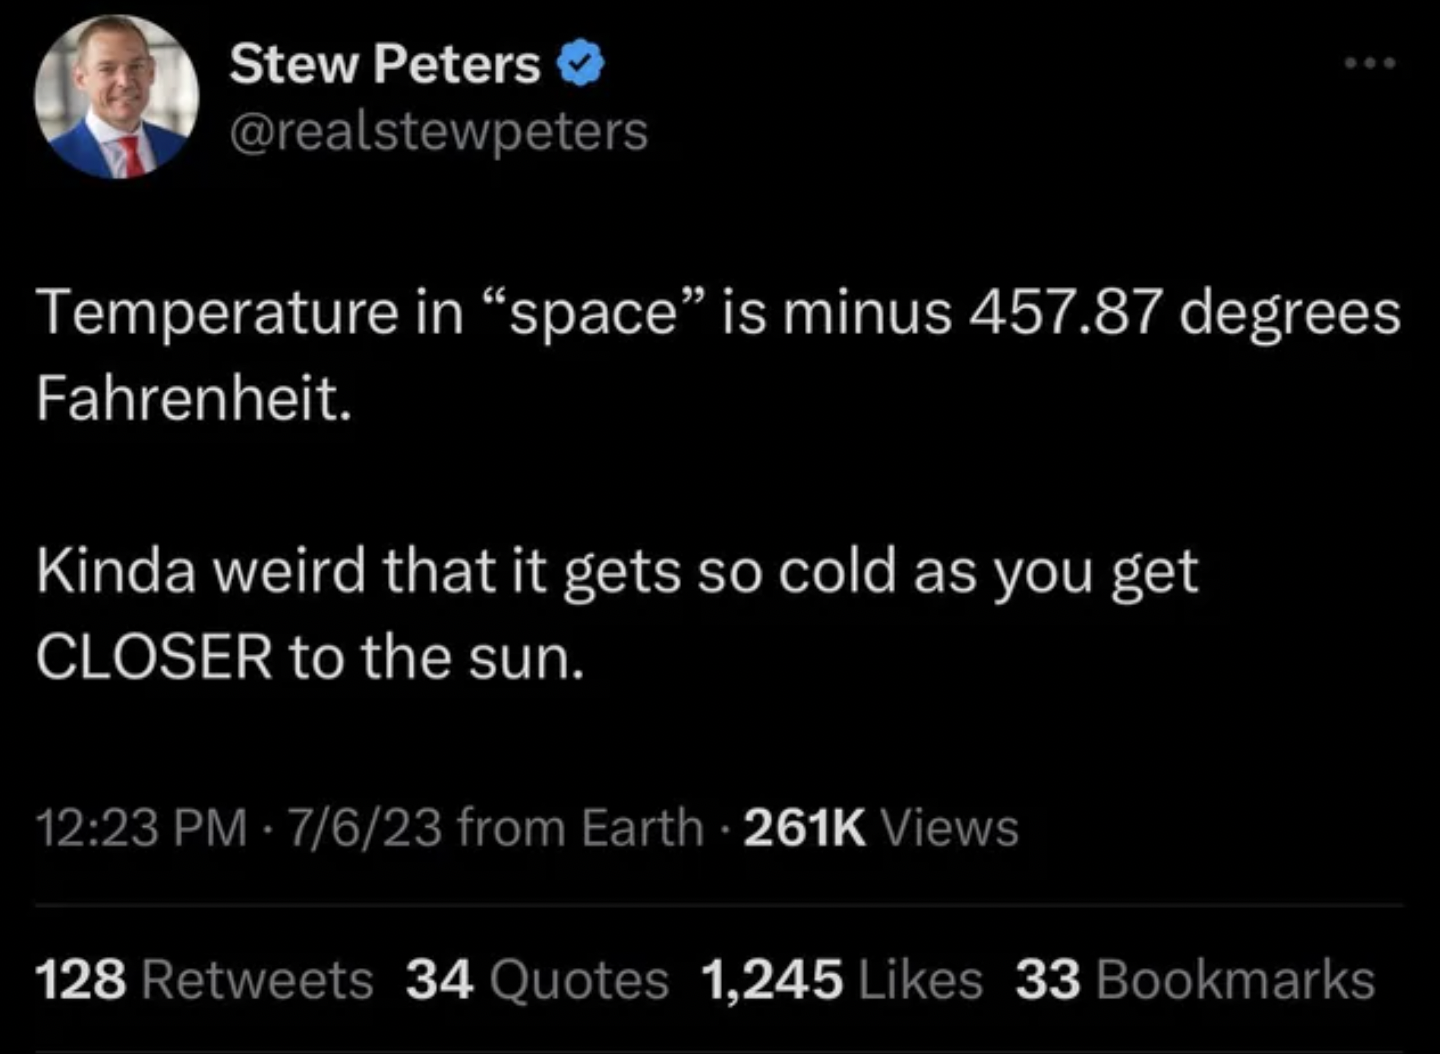 insane people on facebook - atmosphere - Stew Peters Temperature in "space" is minus 457.87 degrees Fahrenheit. Kinda weird that it gets so cold as you get Closer to the sun. 7623 from Earth Views 128 34 Quotes 1,245 33 Bookmarks